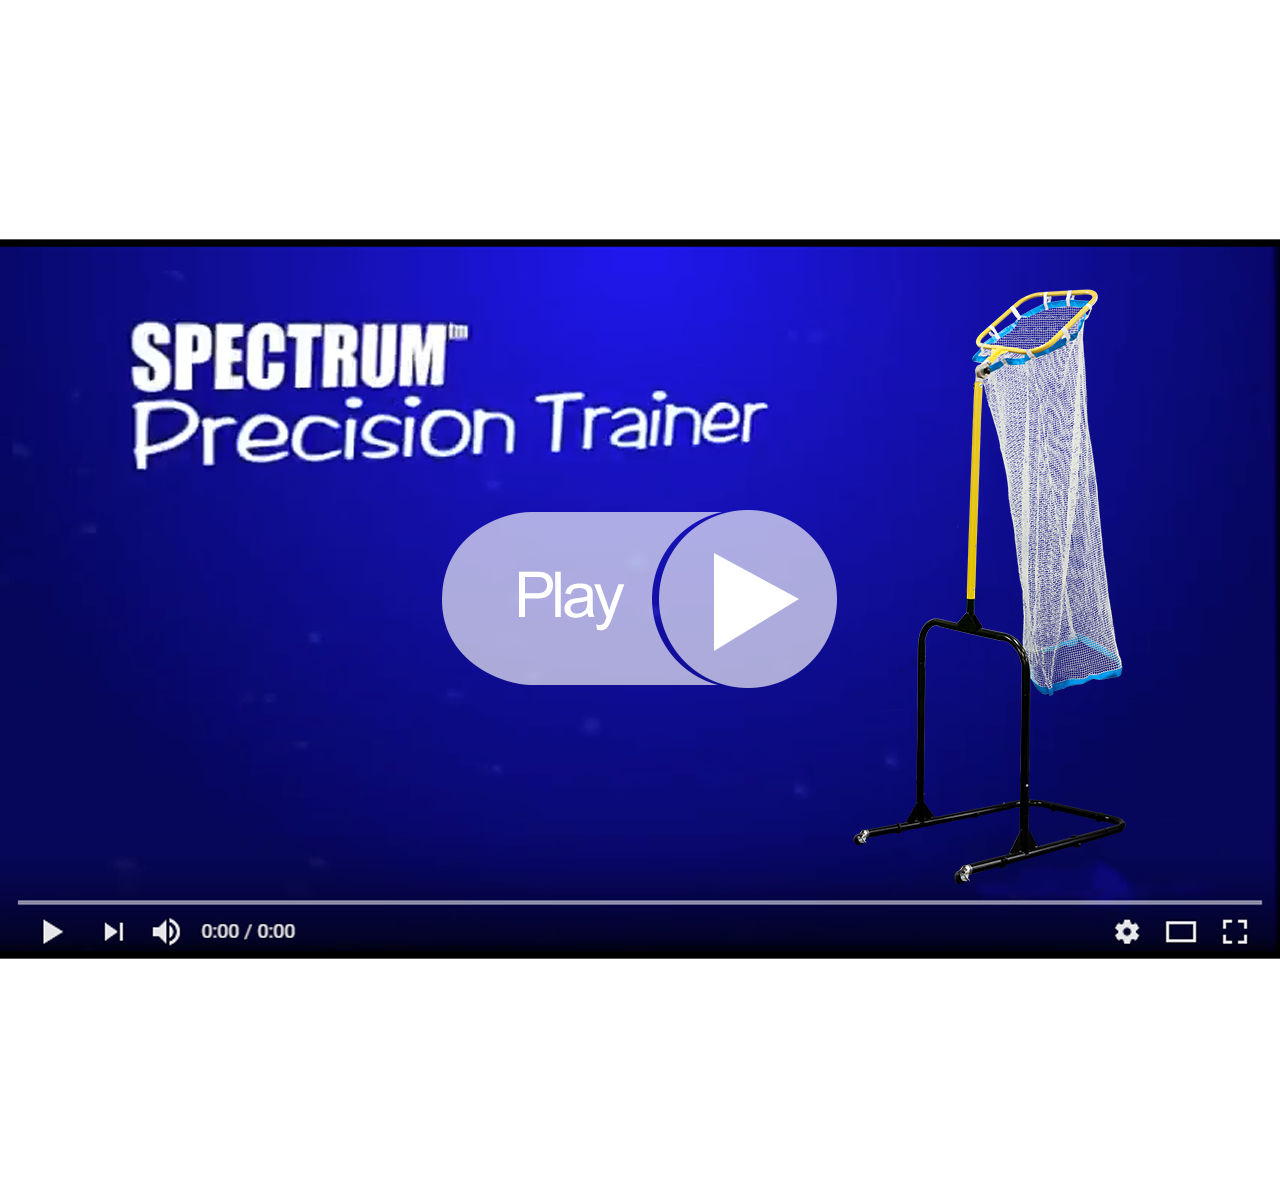 Park and Sports Spectrum Precision Trainer YouTube Video